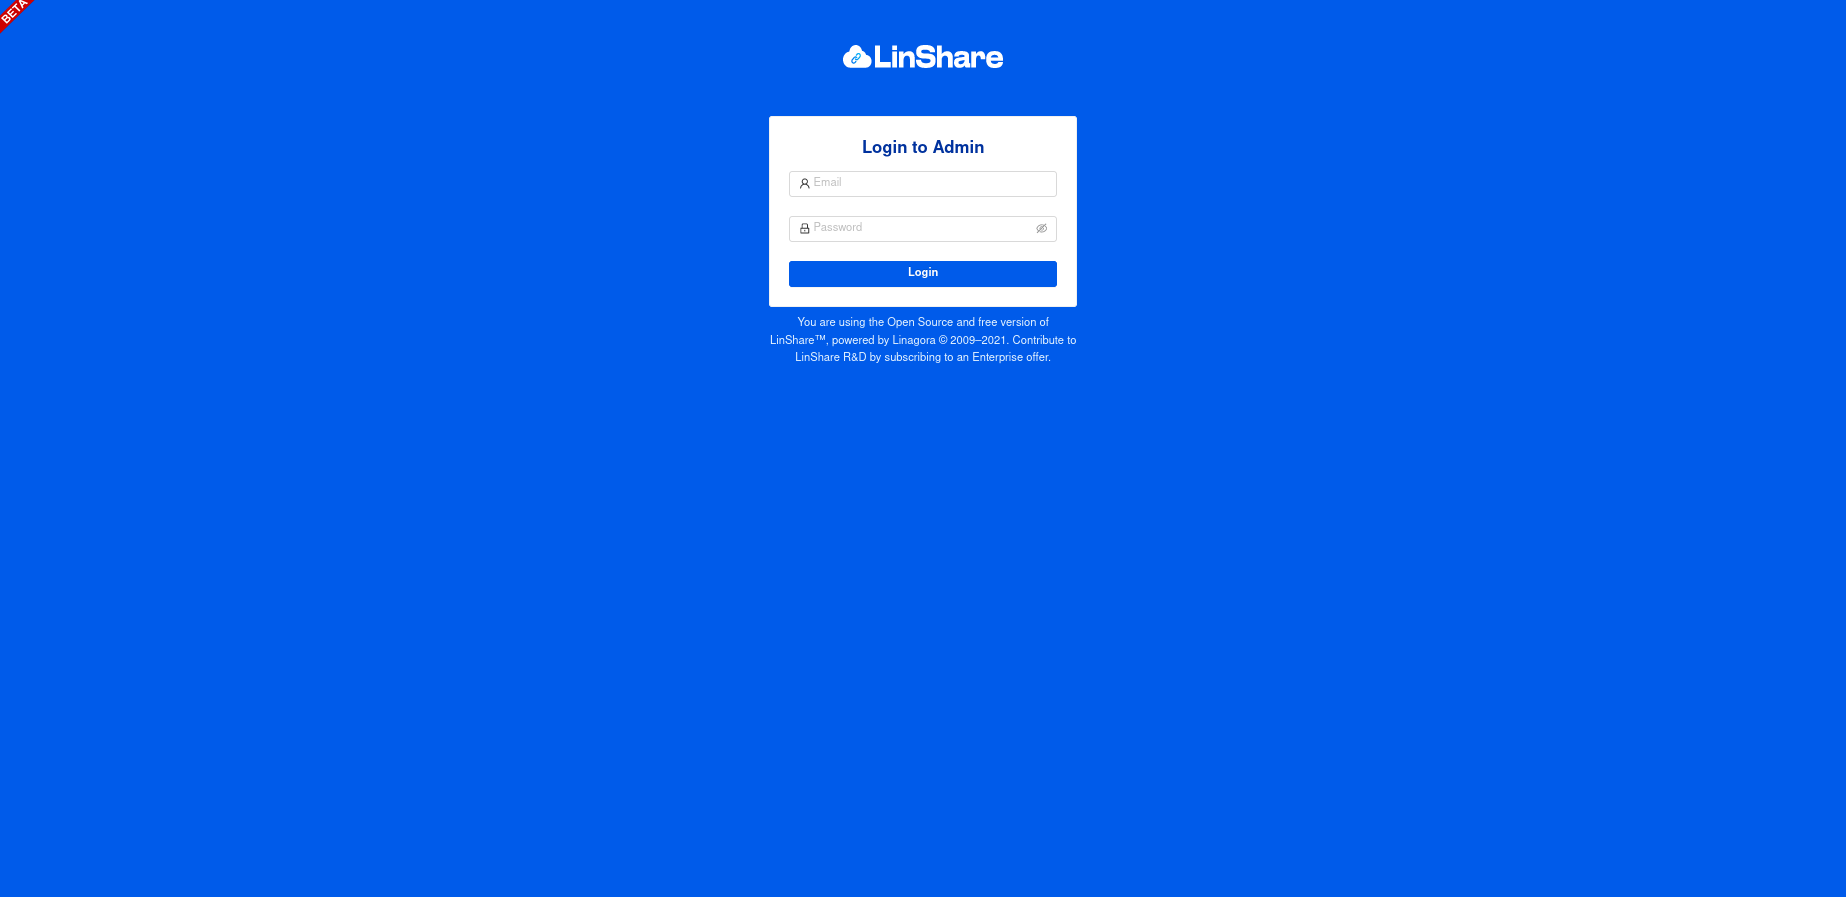 http://download.linshare.org/screenshots/5.0.0/01.authentication.new.admin.portal.png